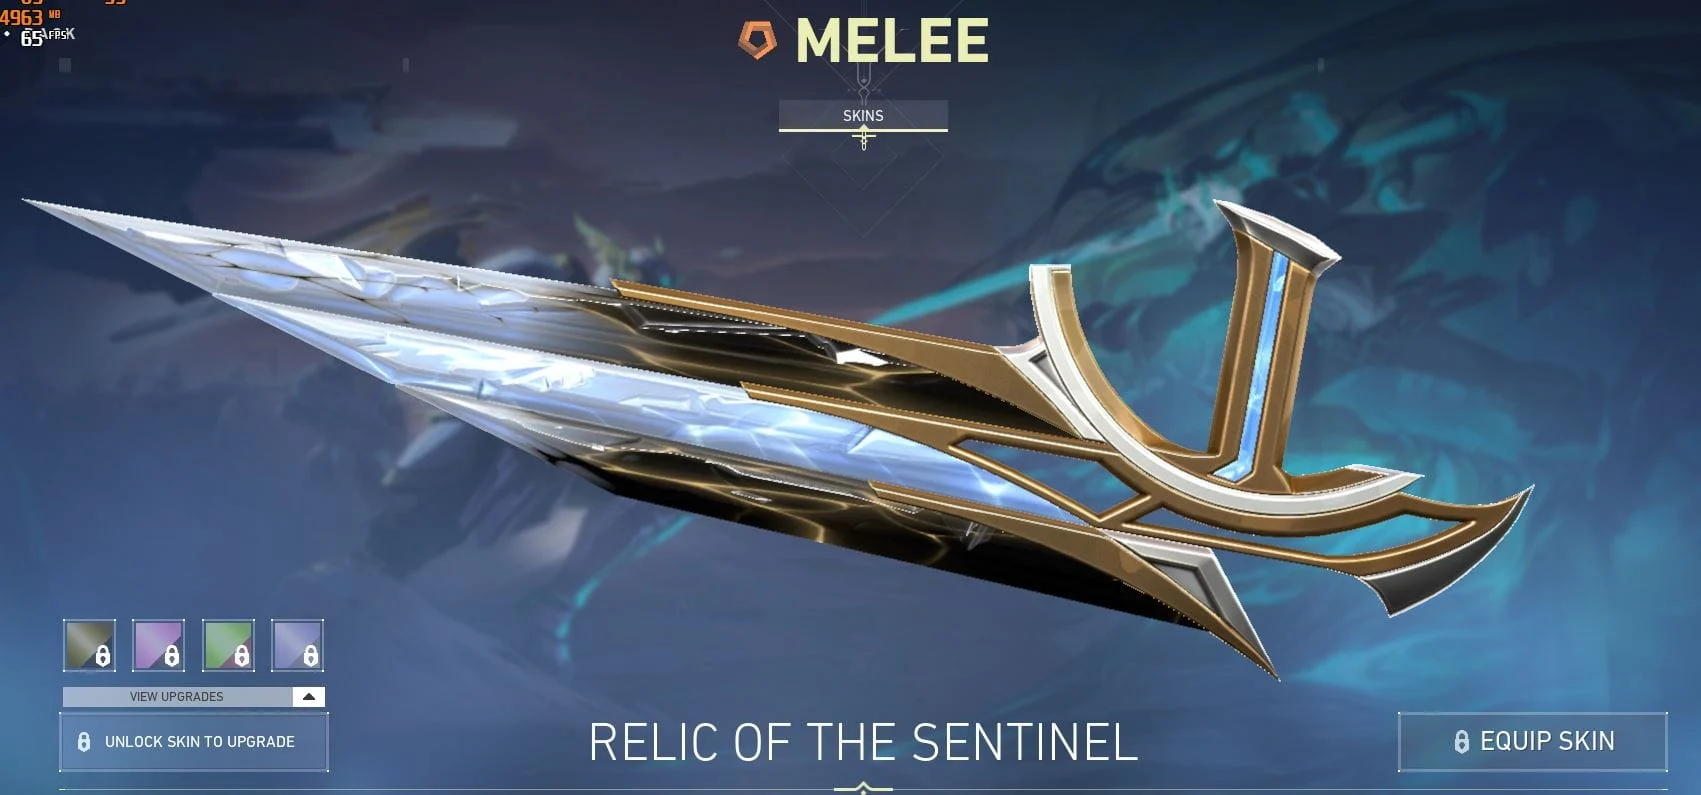 Valorant's Relic of the Sentinel Knife Skin is a razor sharp design that resembles an ancient artefact